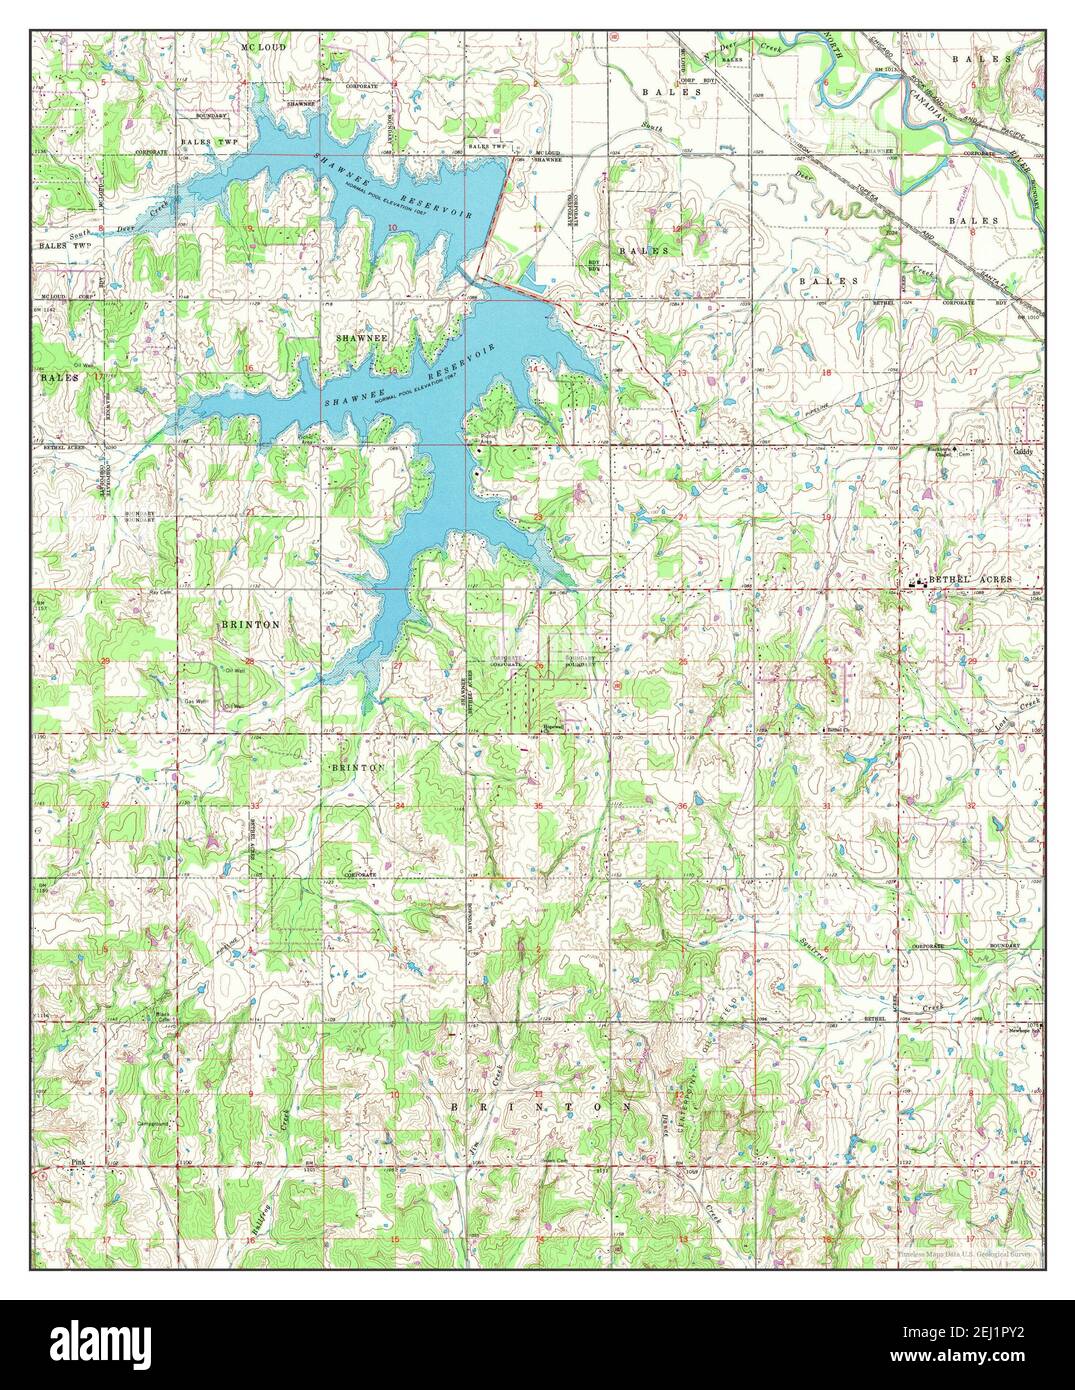 Shawnee Reservoir, Oklahoma, map 1966, 1:24000, United States of America by Timeless Maps, data U.S. Geological Survey Foto Stock